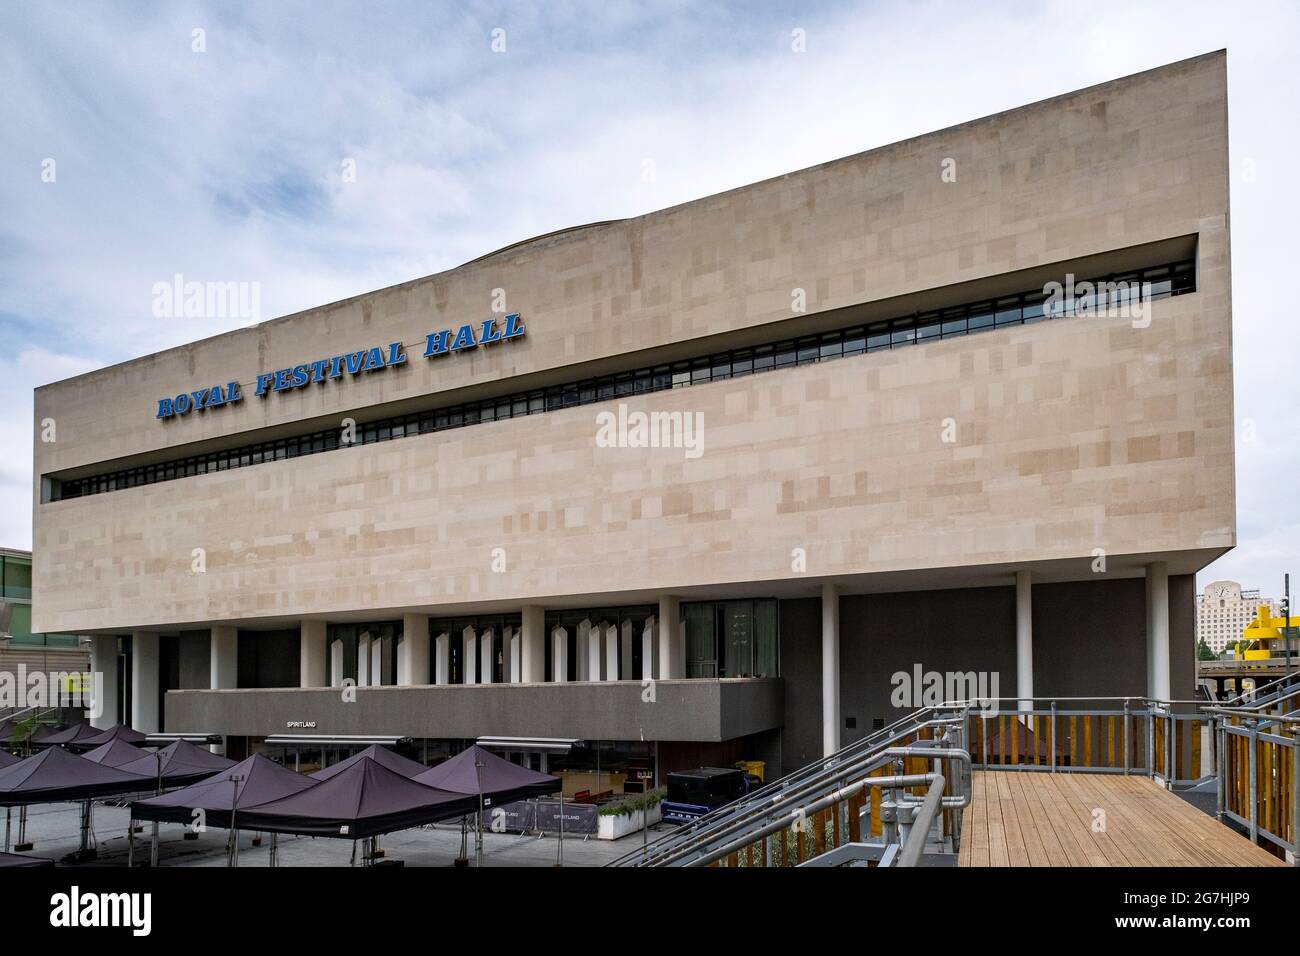 Royal Festival Hall is a 2,700-seat concert, dance and talks venue within Southbank Centre in London, situated on the South Bank of the River Thames Stock Photo